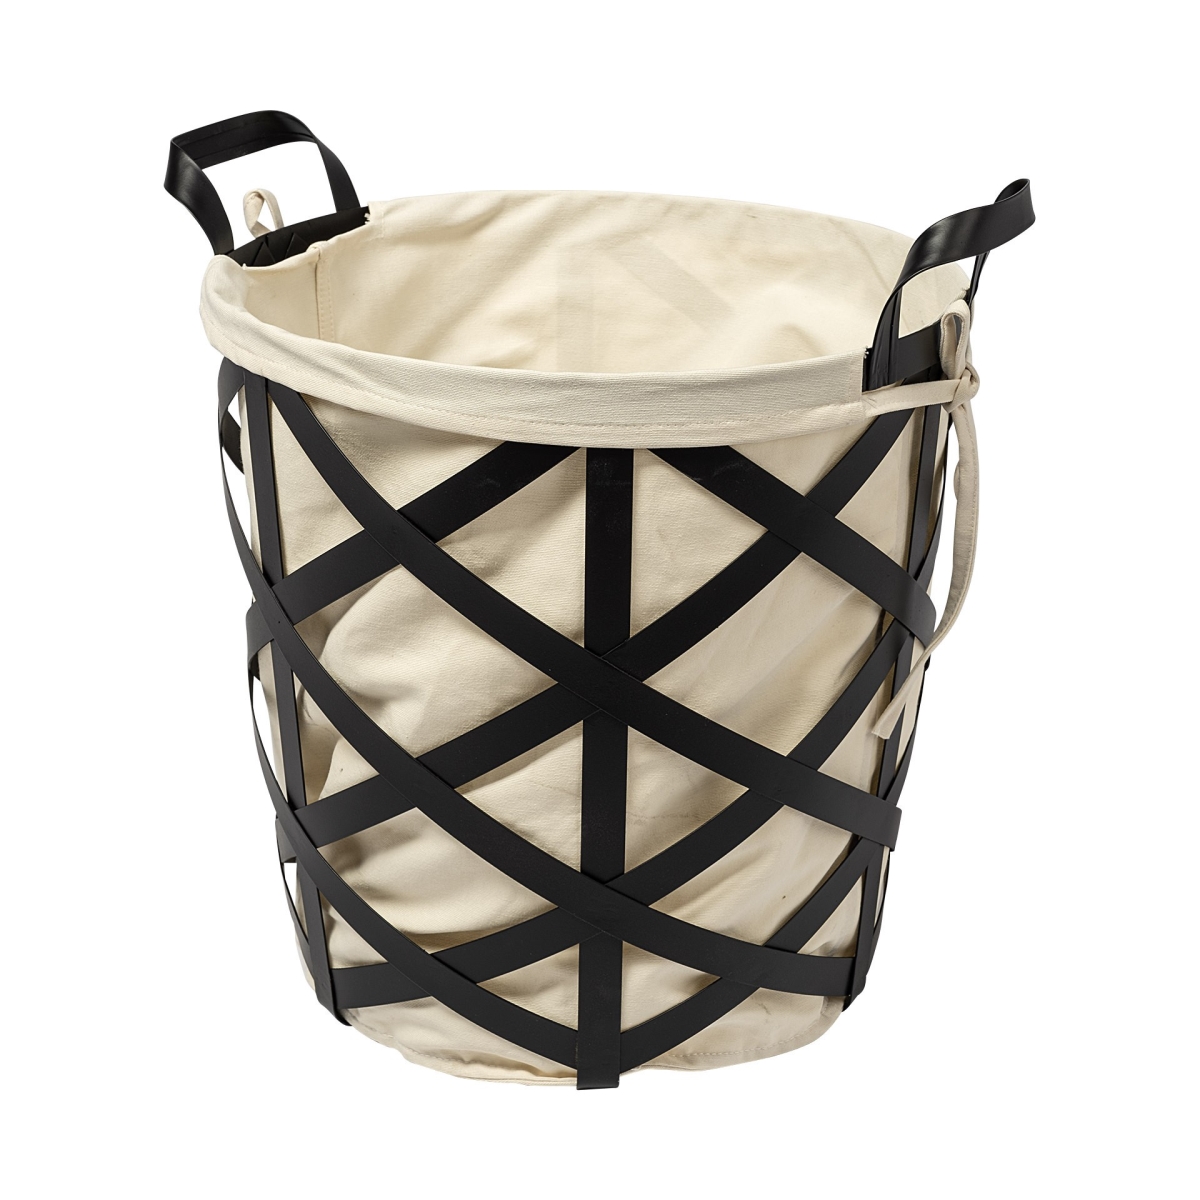 Picture of HomeRoots 392148 17.32 x 14.56 x 18.11 in. Black Woven Metal Basket with Cream Fabric Liner